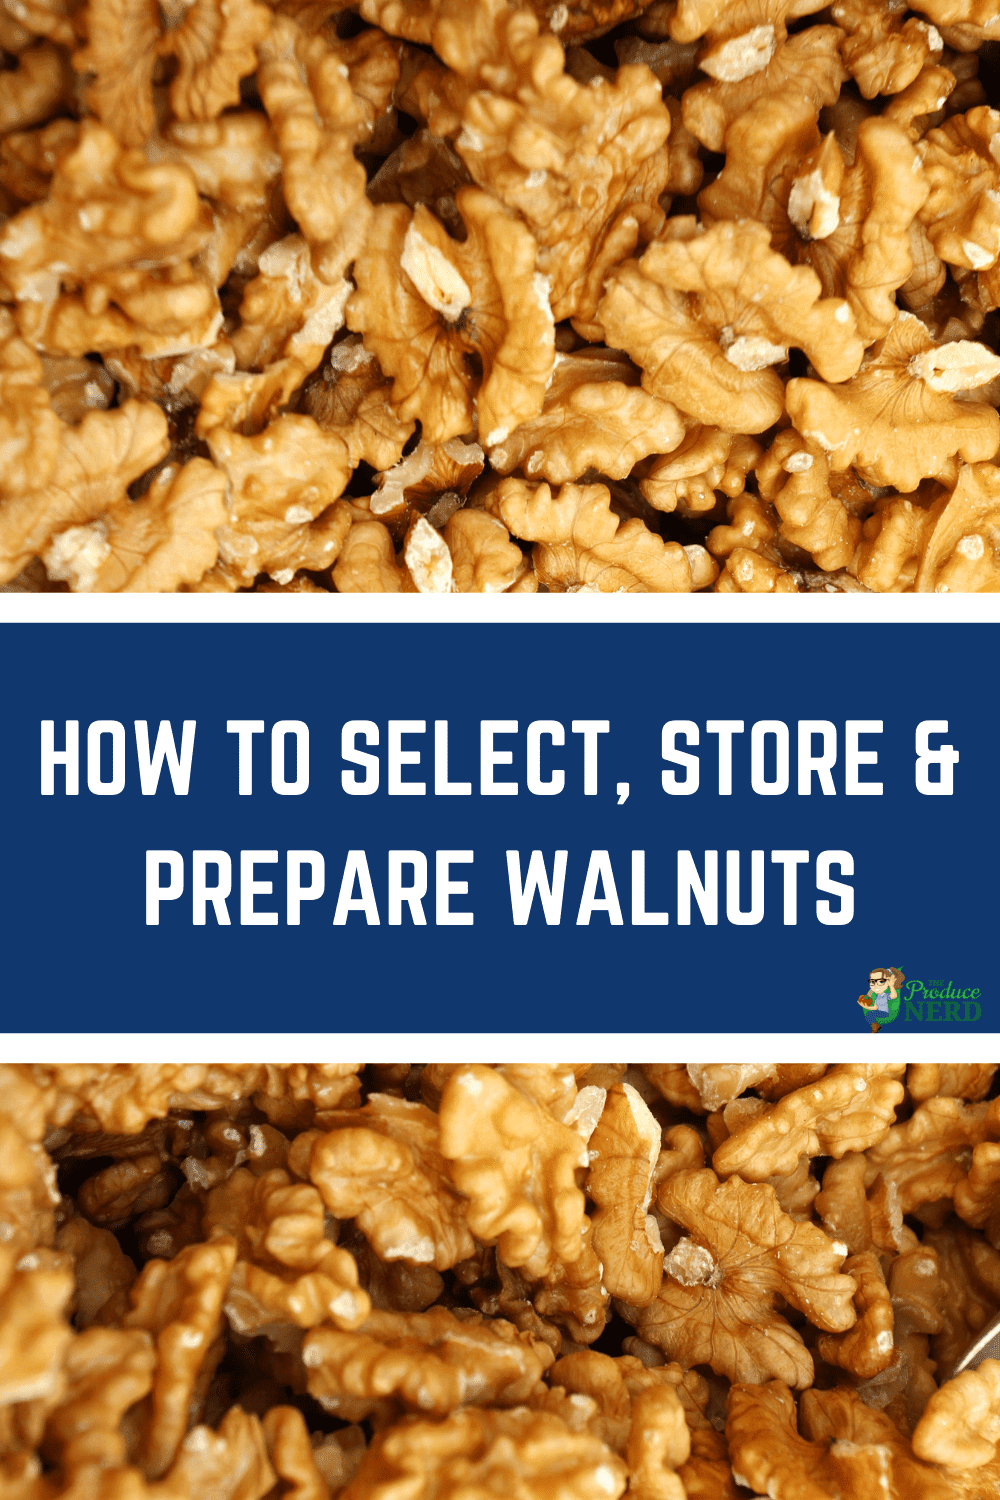 You are currently viewing How to Select, Store & Prepare Walnuts